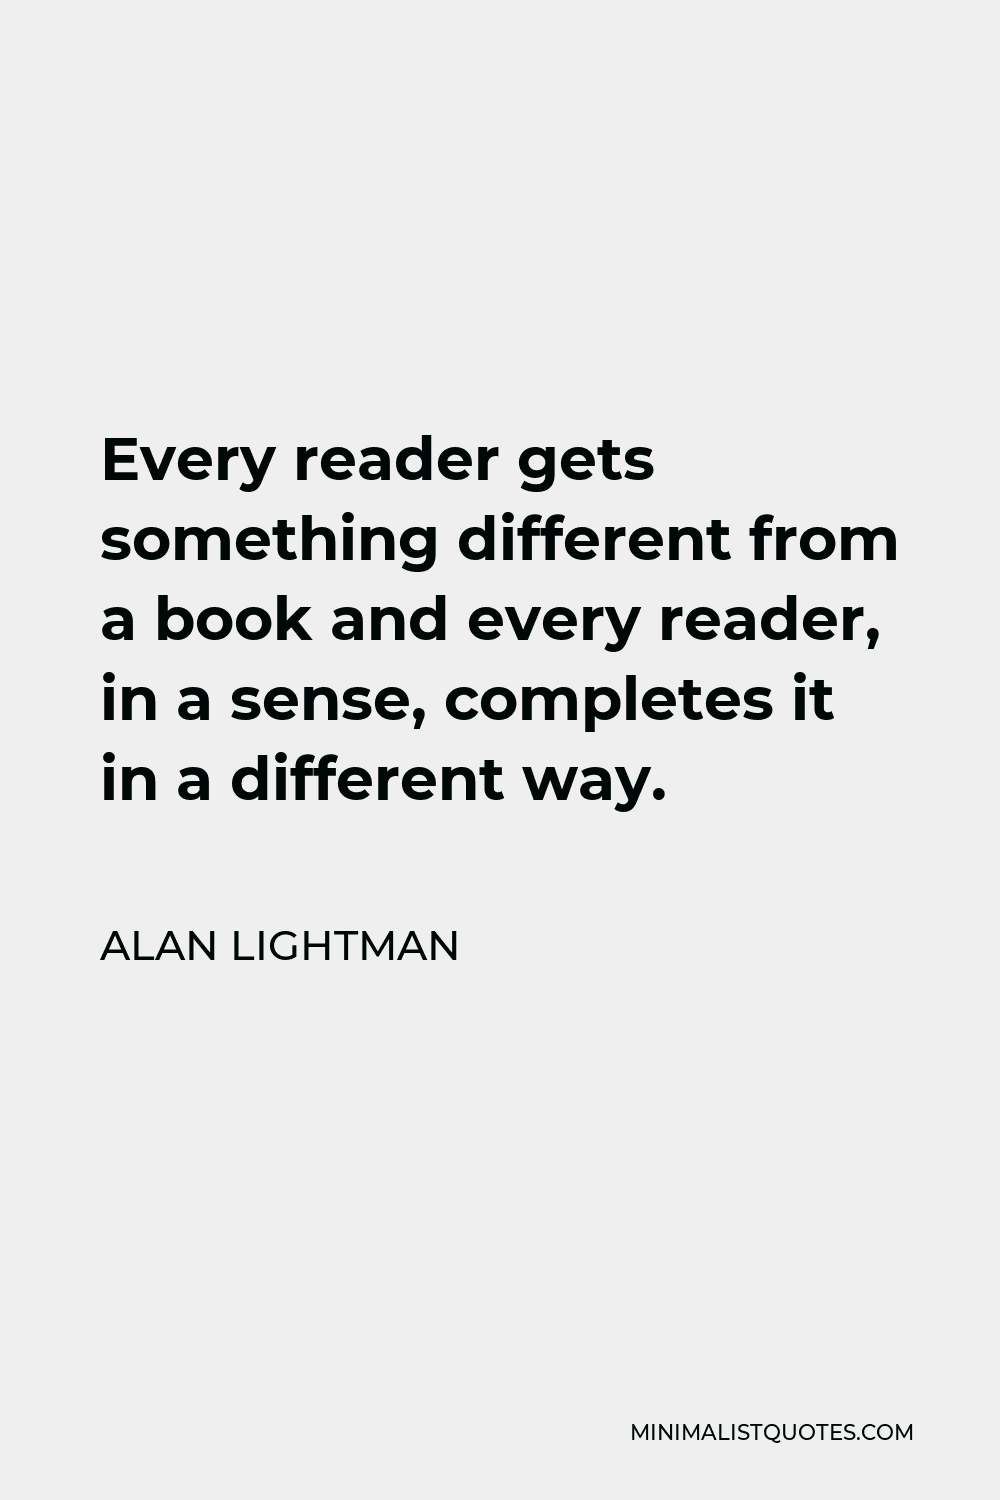 Alan Lightman Quote - Every reader gets something different from a book and every reader, in a sense, completes it in a different way.